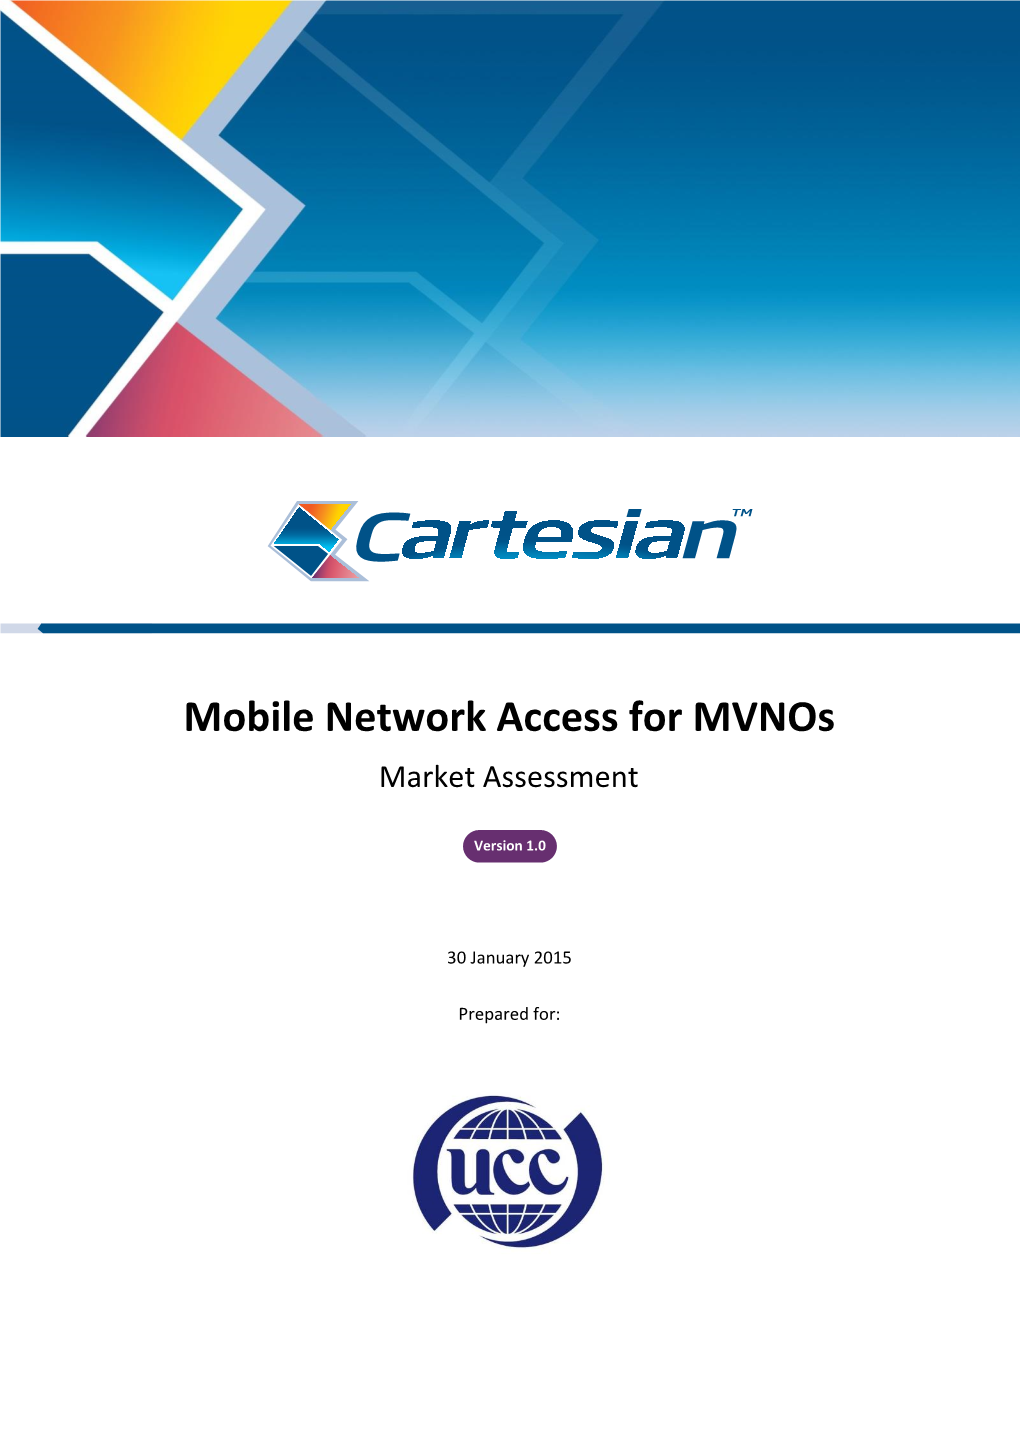 Mobile Network Access for Mvnos Market Assessment